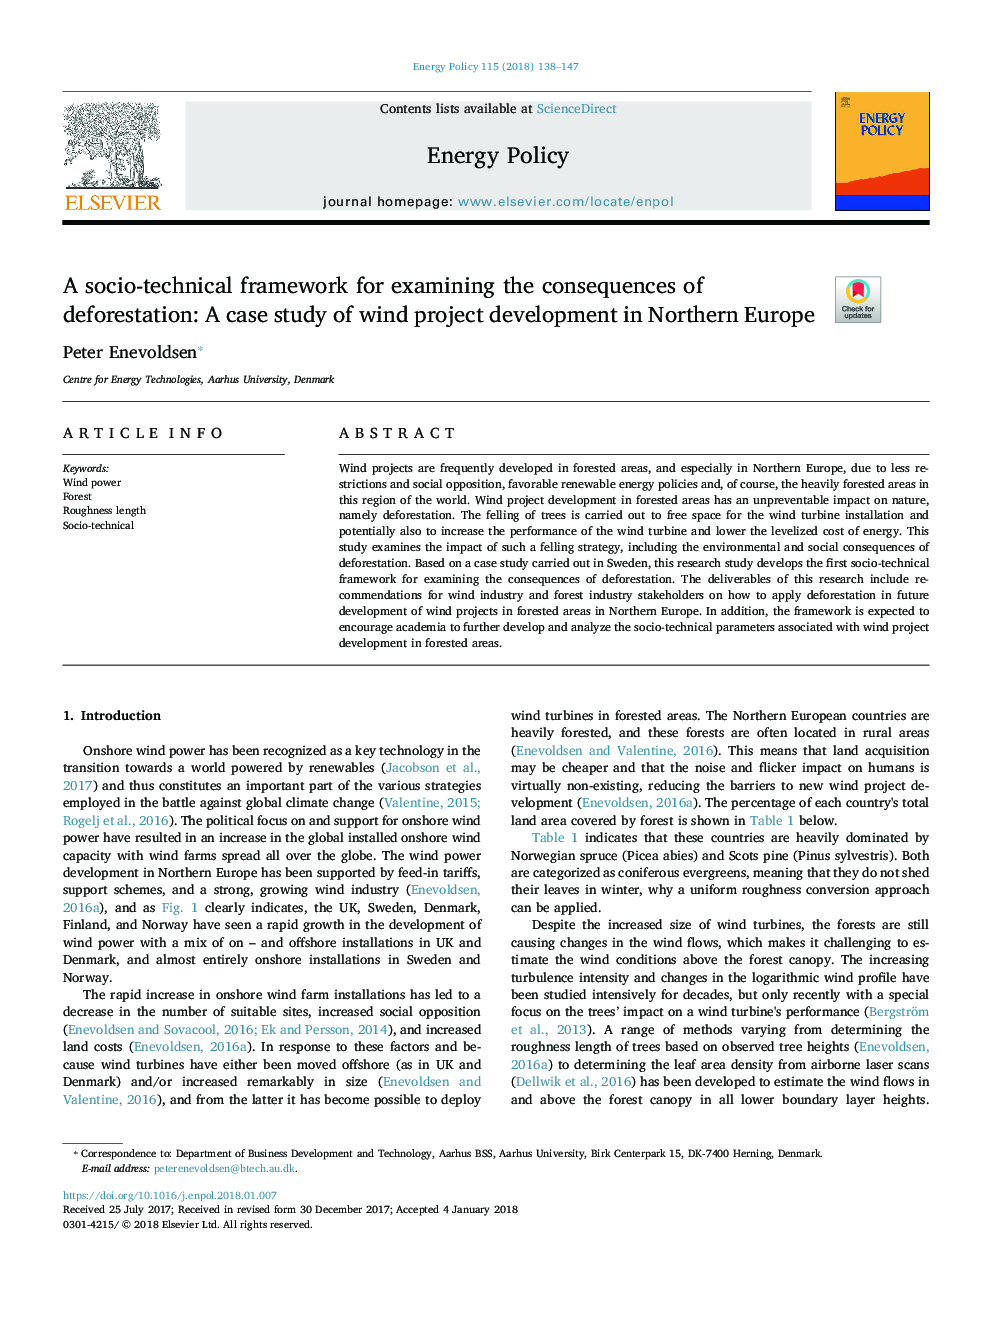 A socio-technical framework for examining the consequences of deforestation: A case study of wind project development in Northern Europe